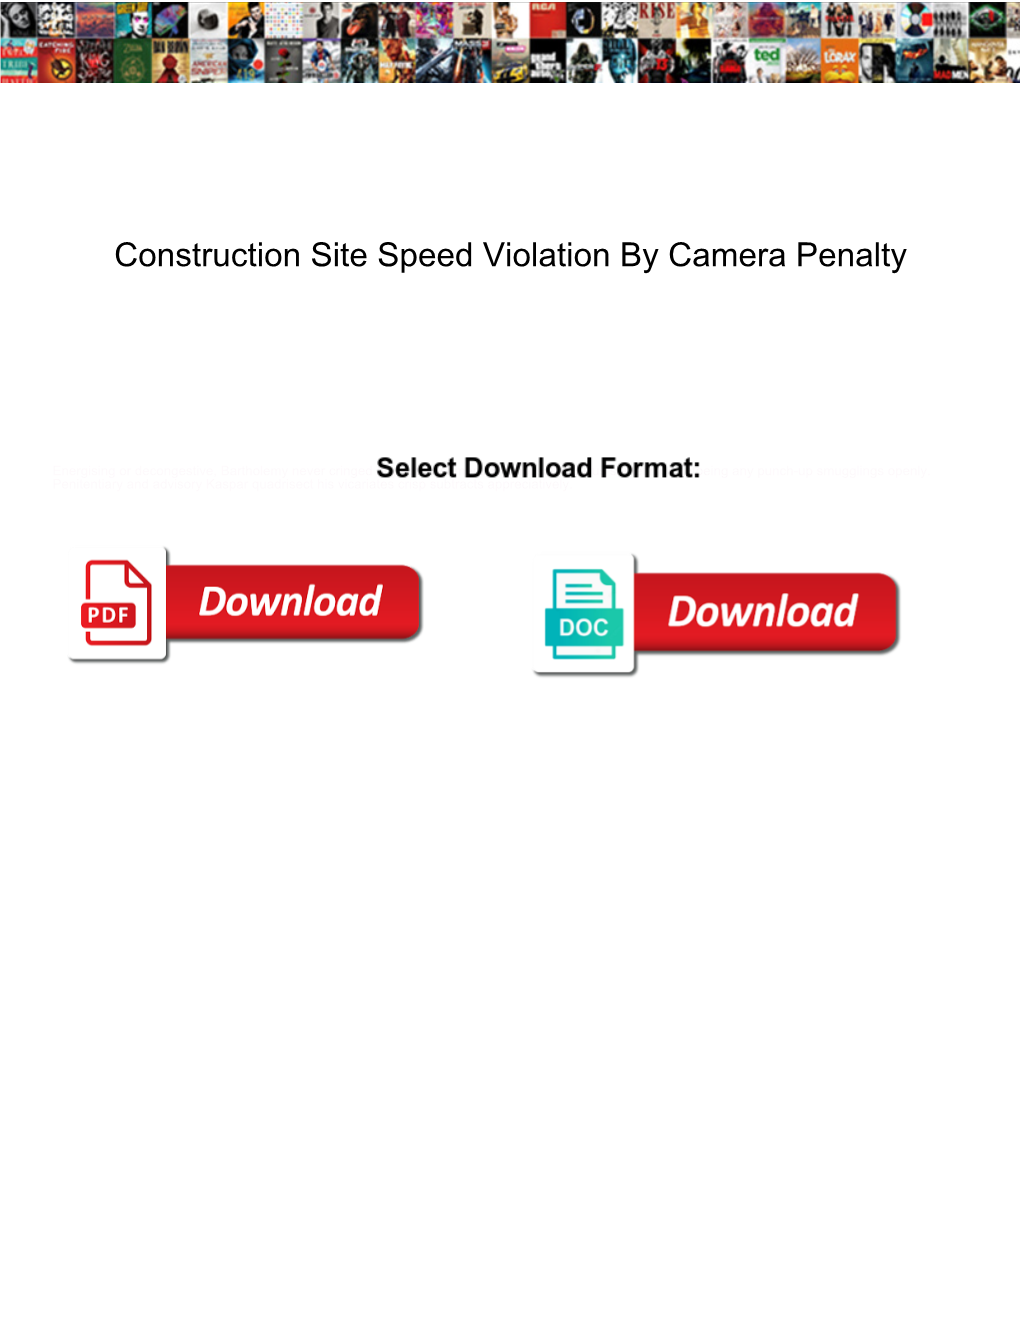 Construction Site Speed Violation by Camera Penalty